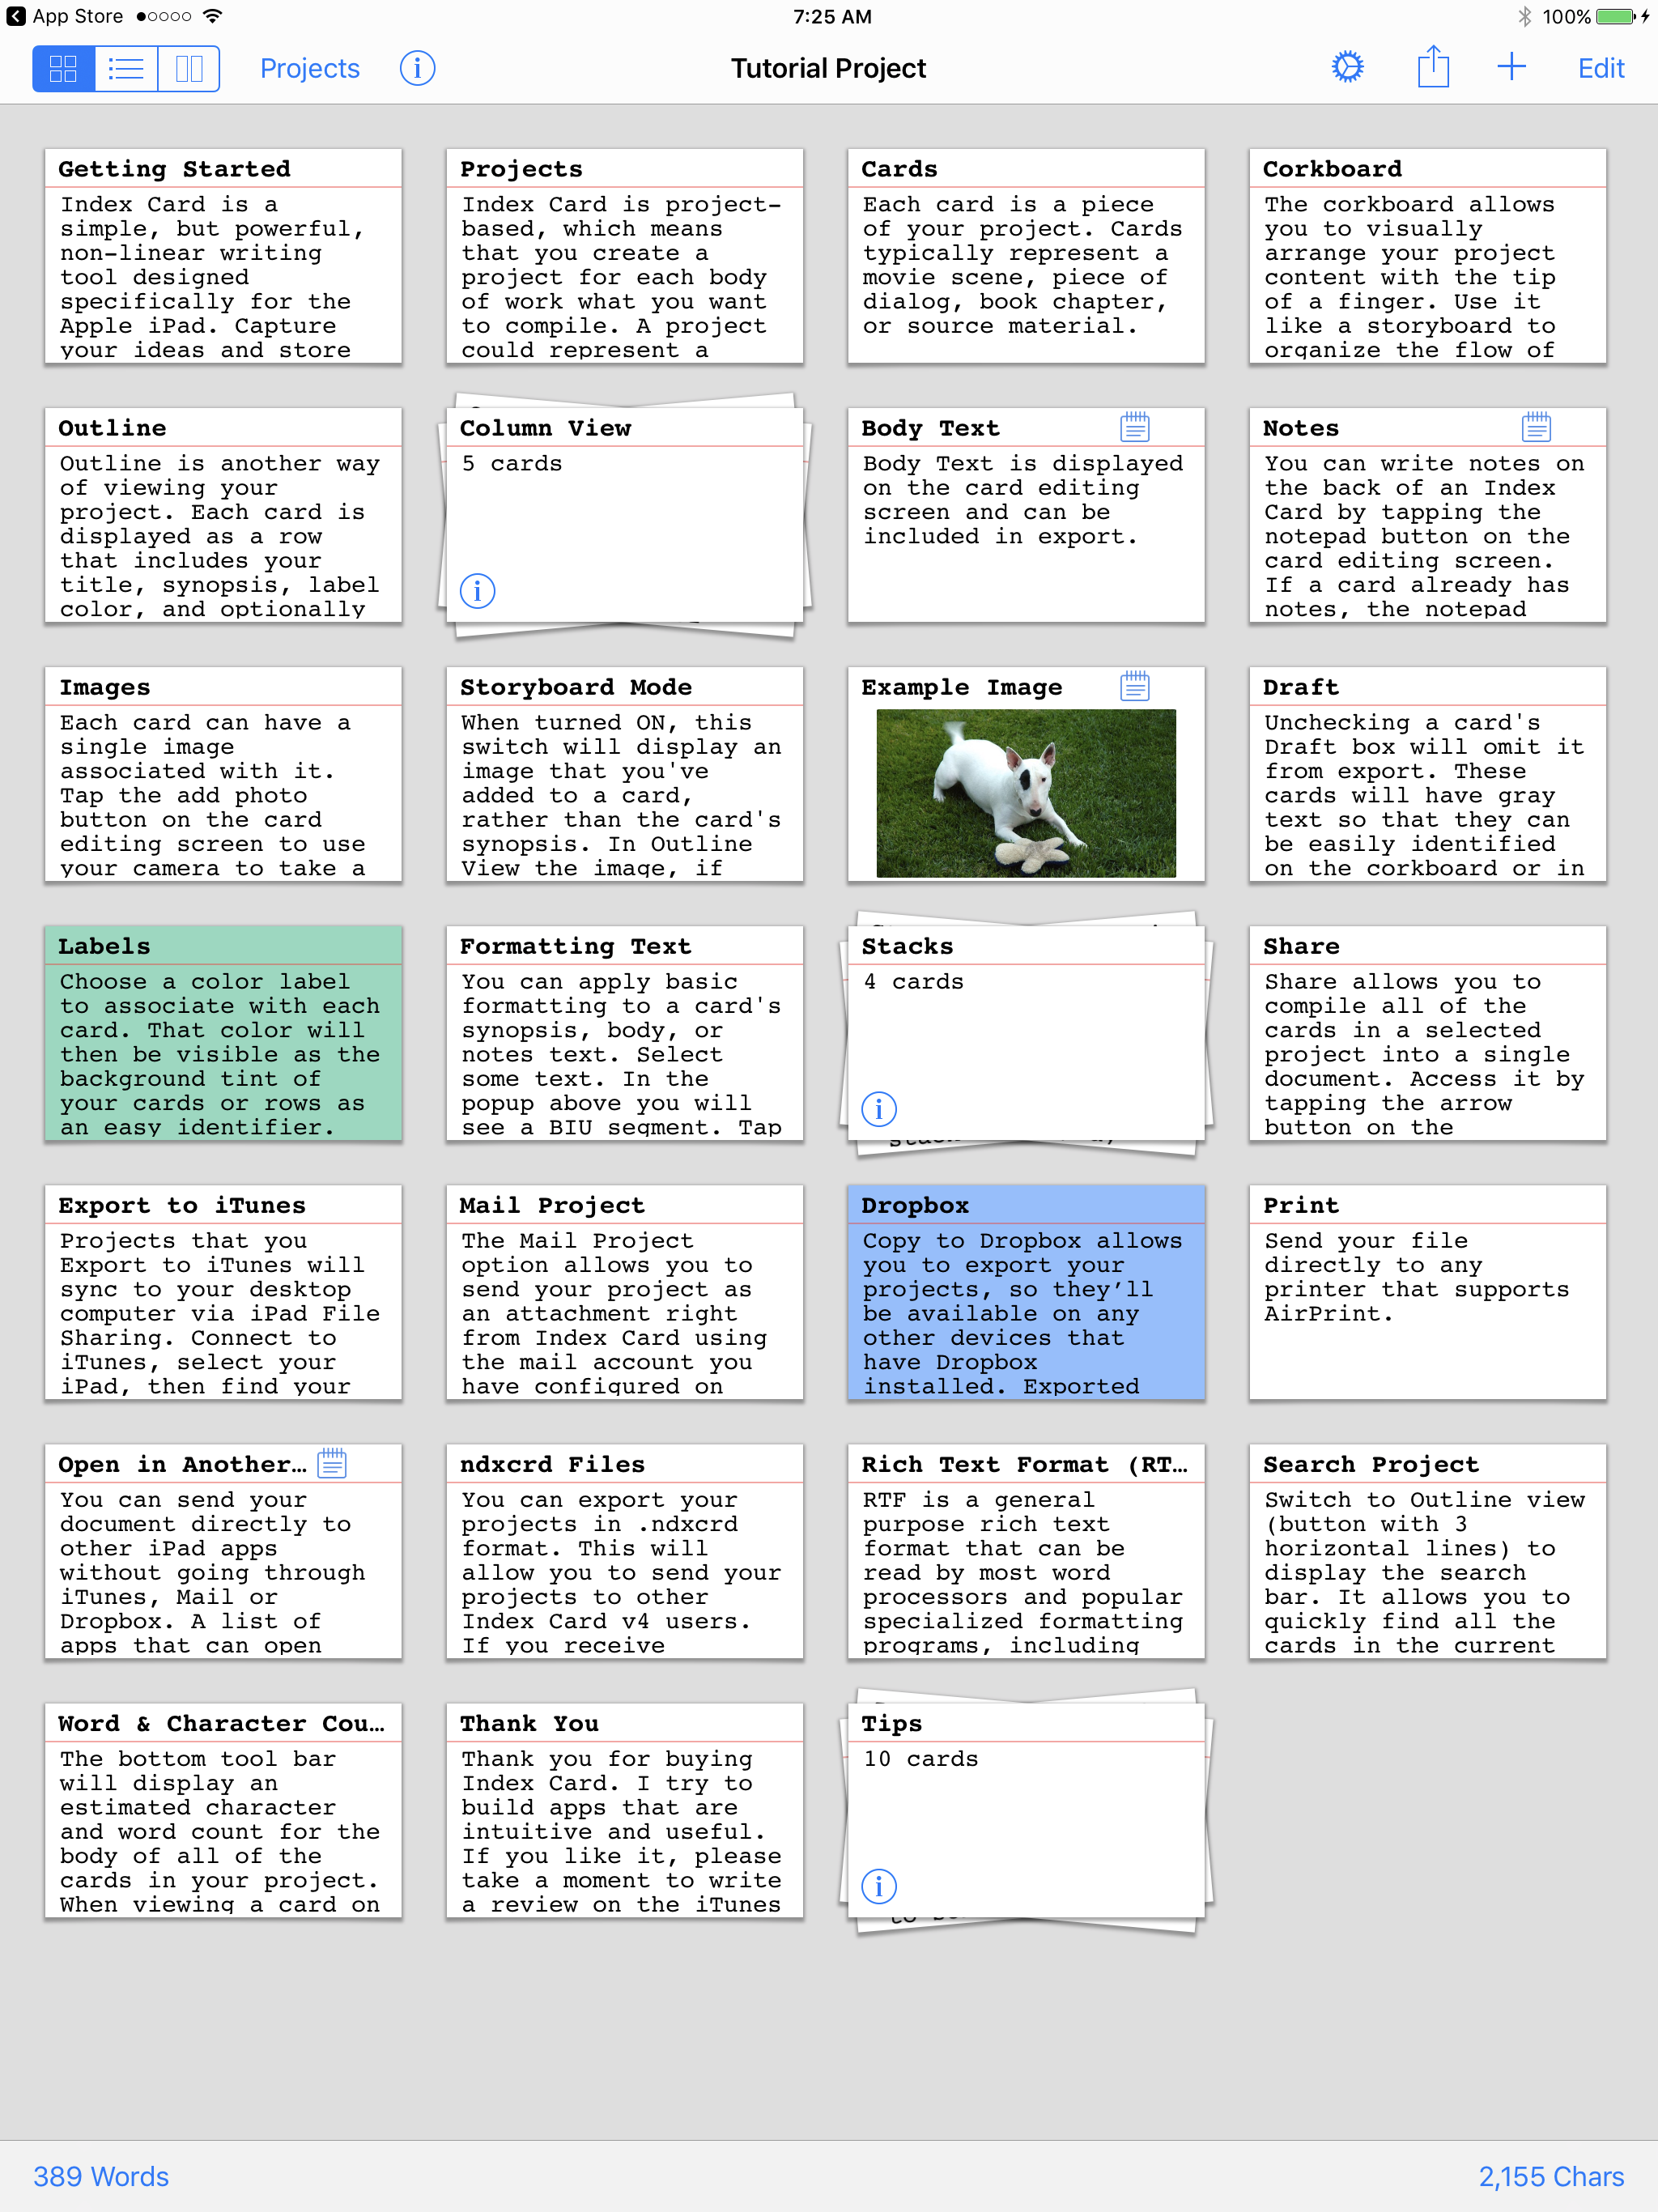 app for making note cards with mac and iphone